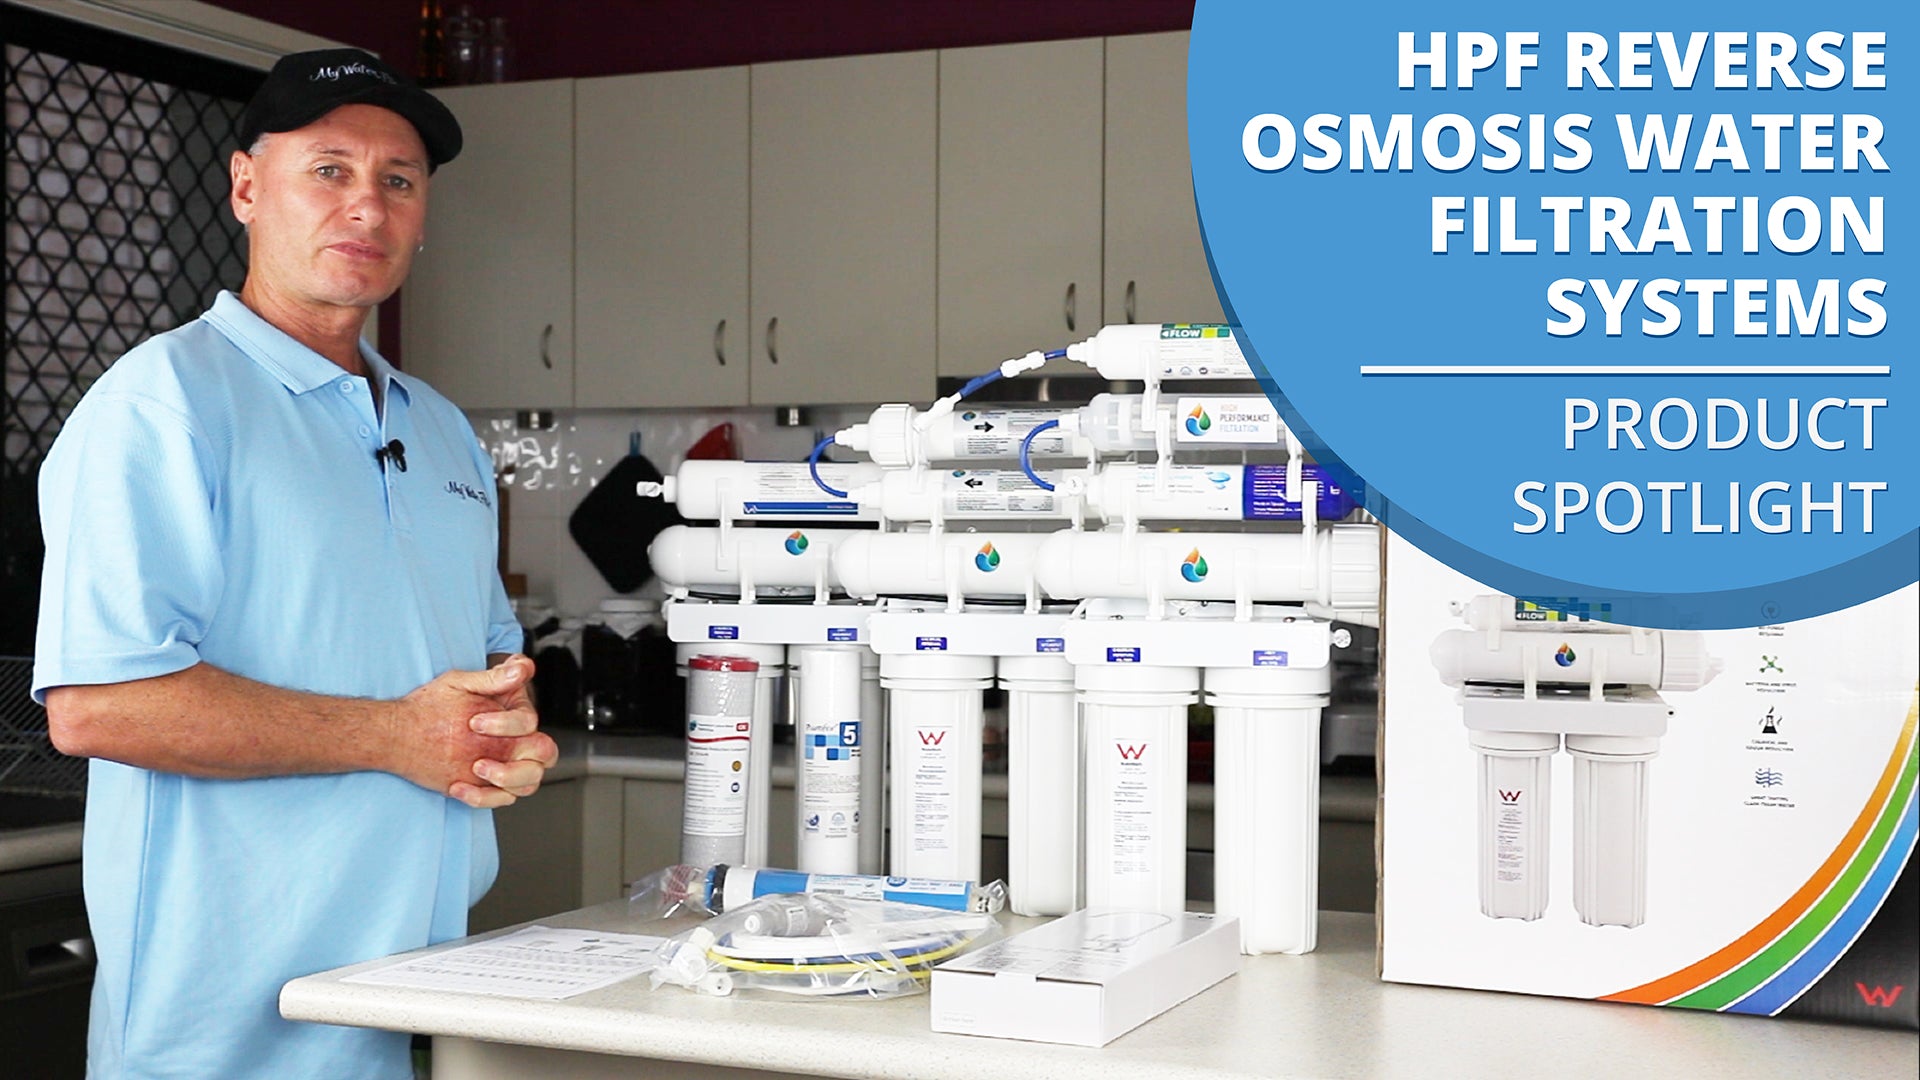 [VIDEO] HPF Reverse Osmosis Water Filtration Systems - Product Spotlight